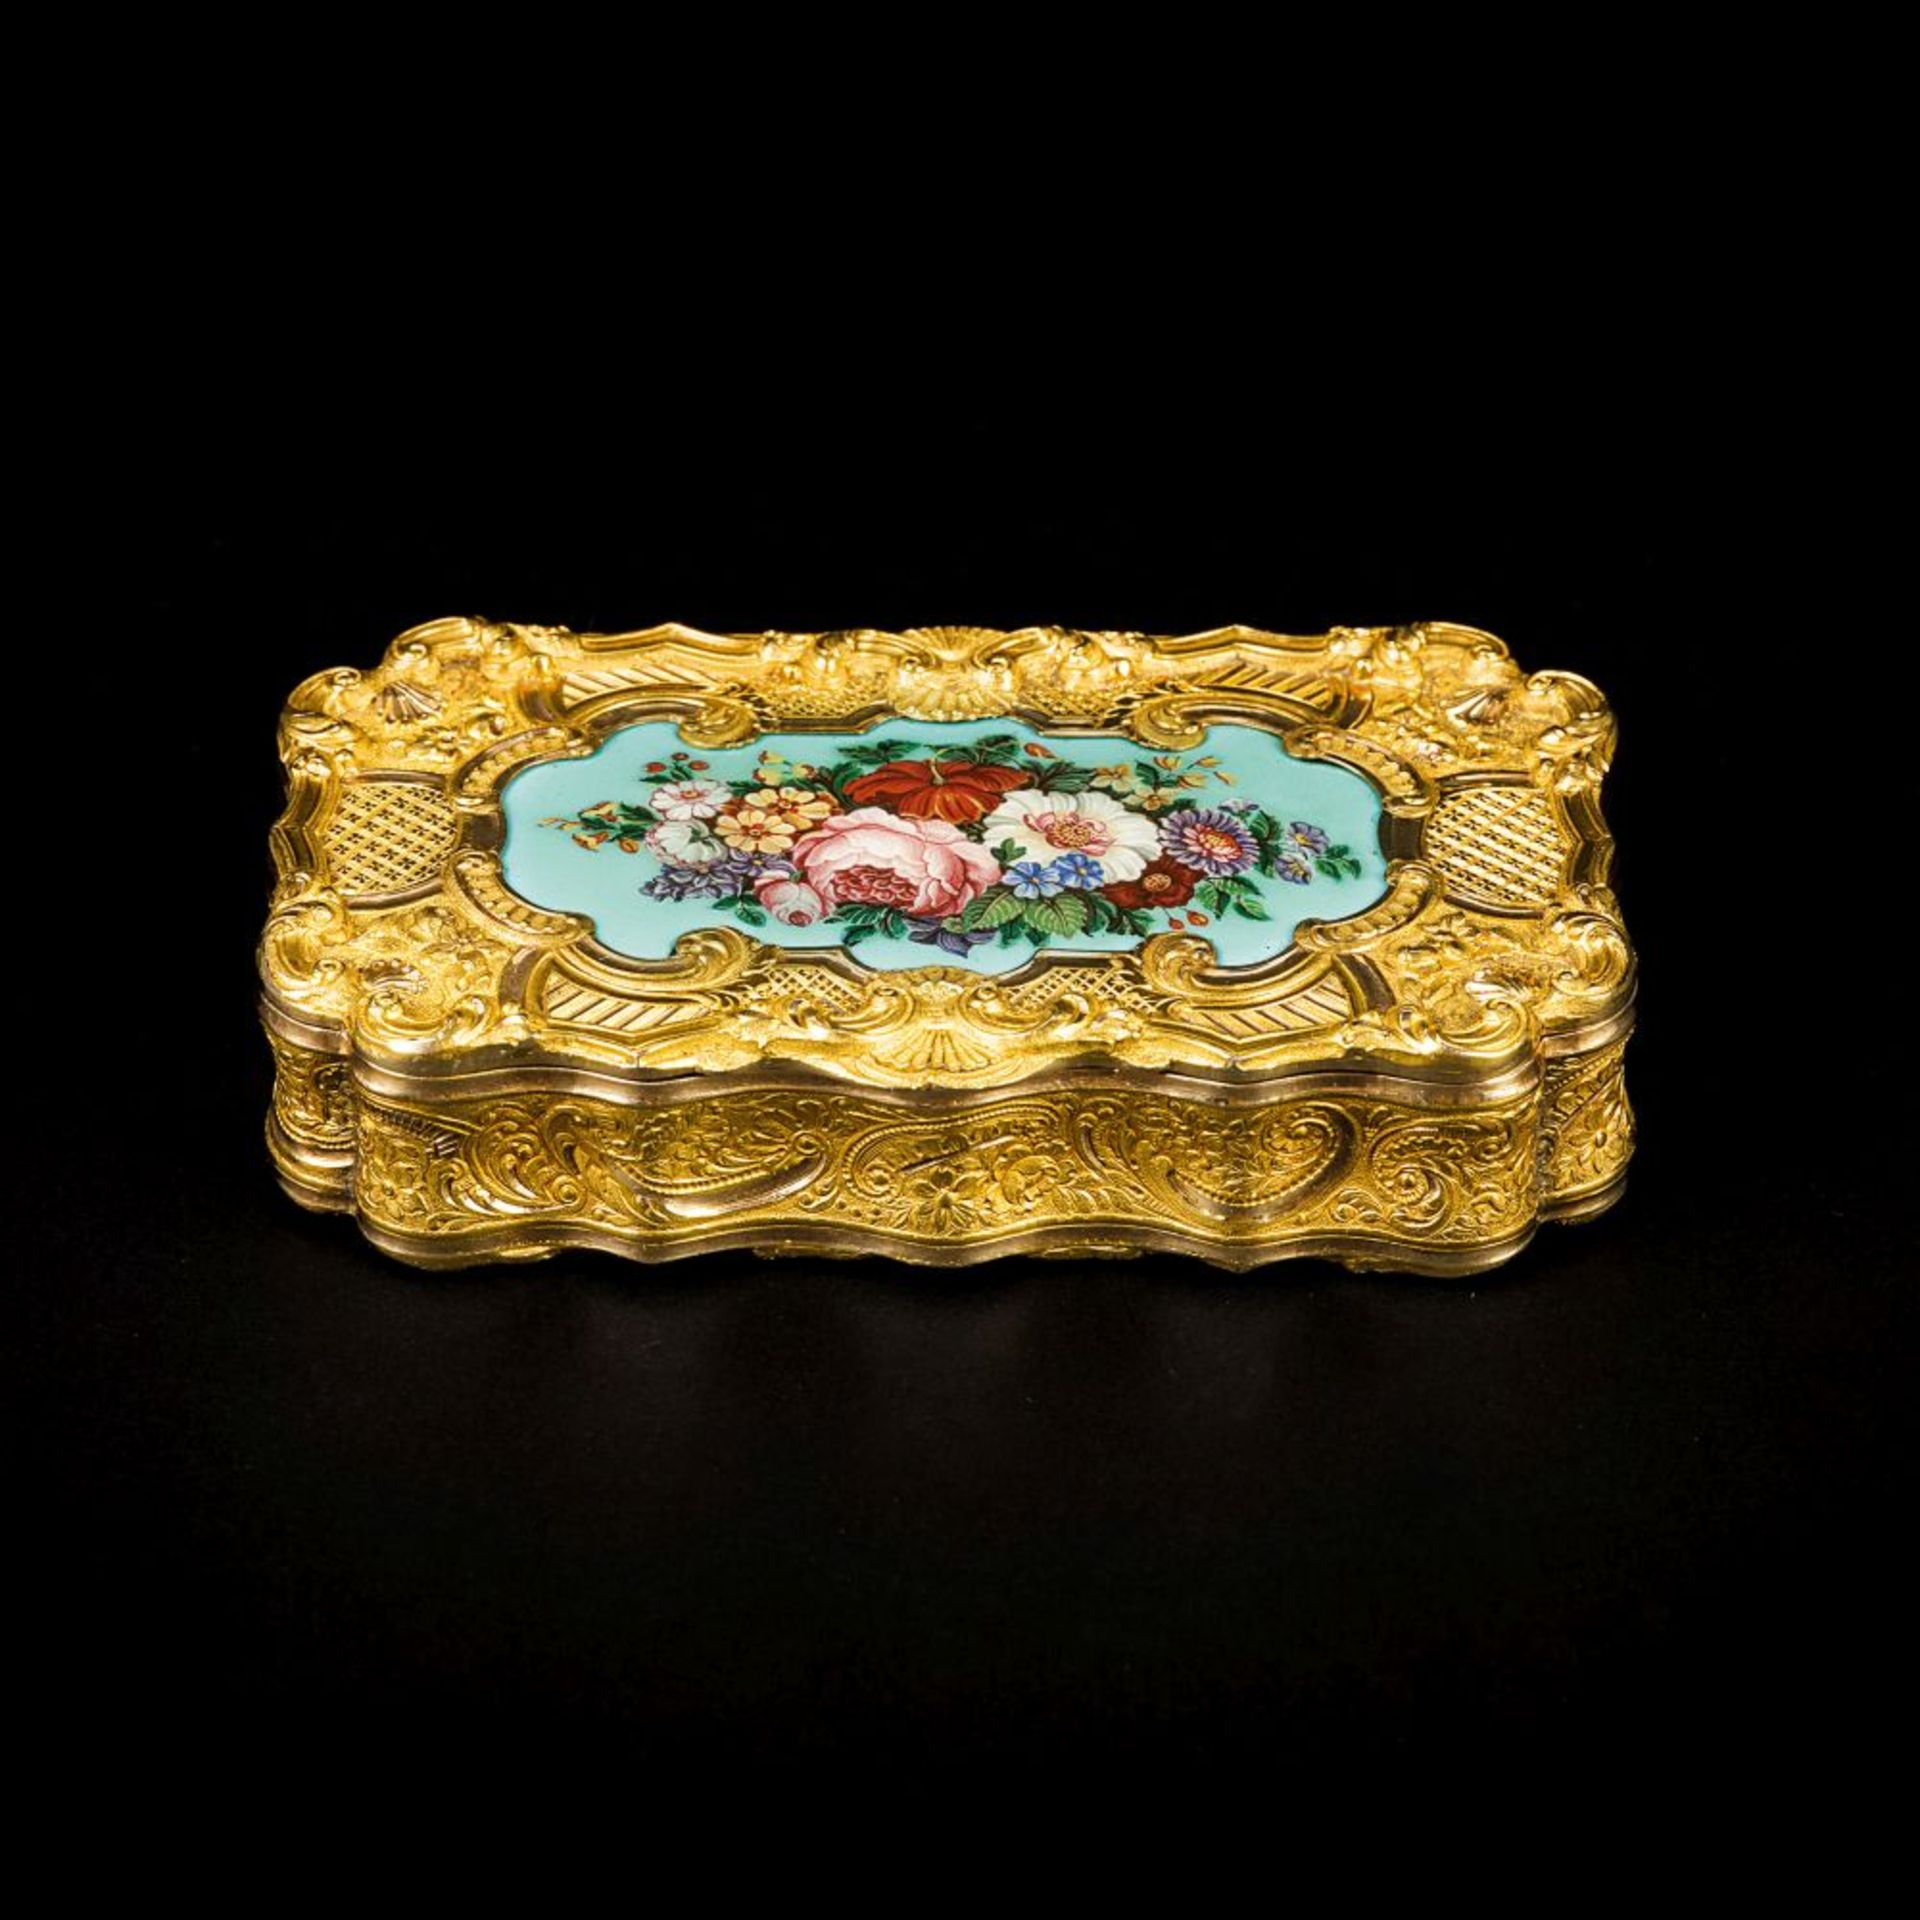 A Gold Snuffbox with Enamel Painting.